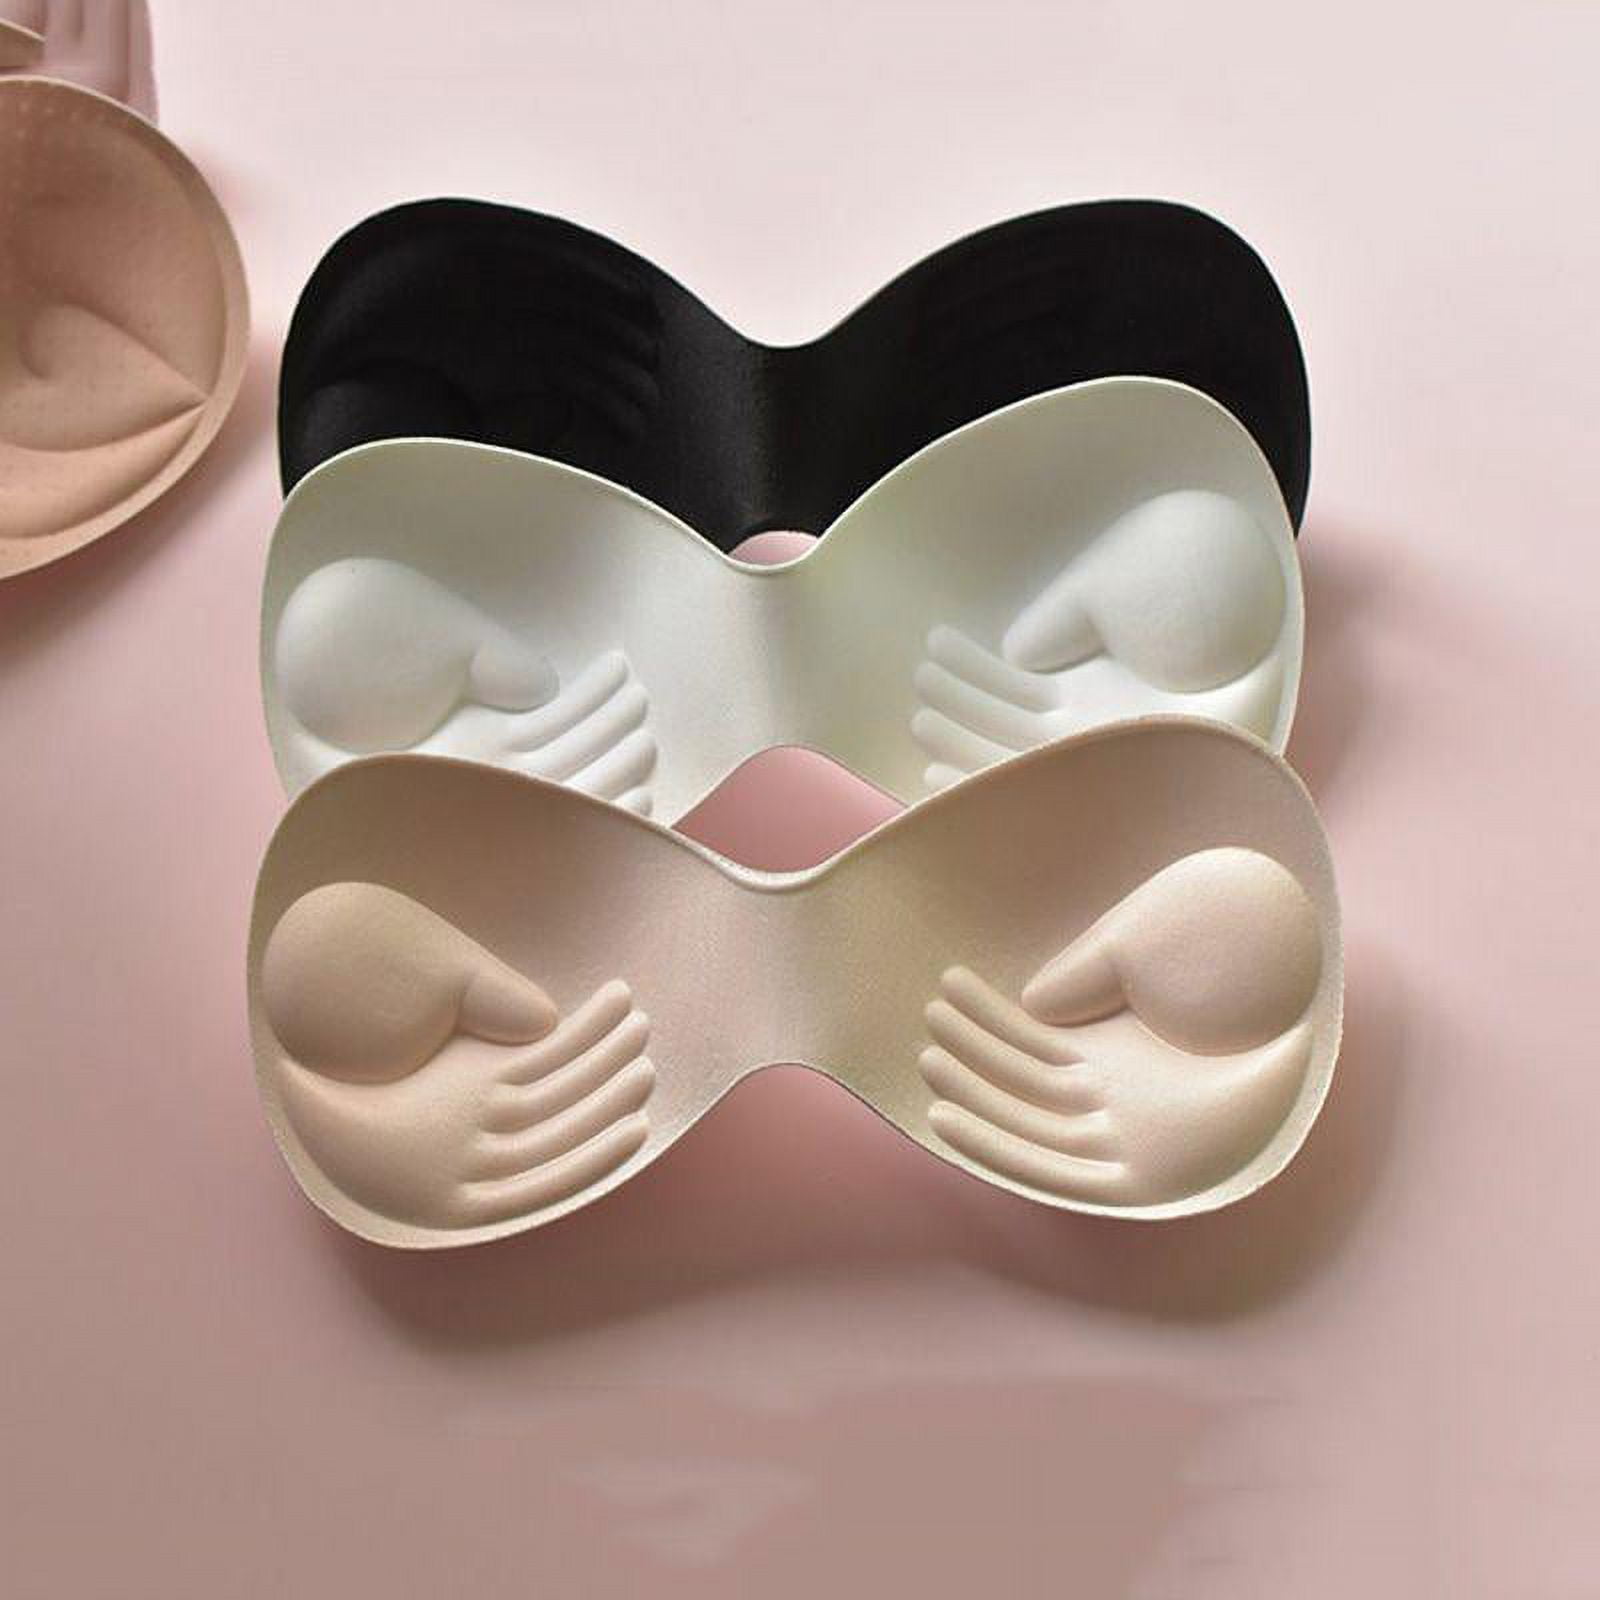 One Piece Bra Pads Inserts - Push Up Bra Cup Chest Pads (Black